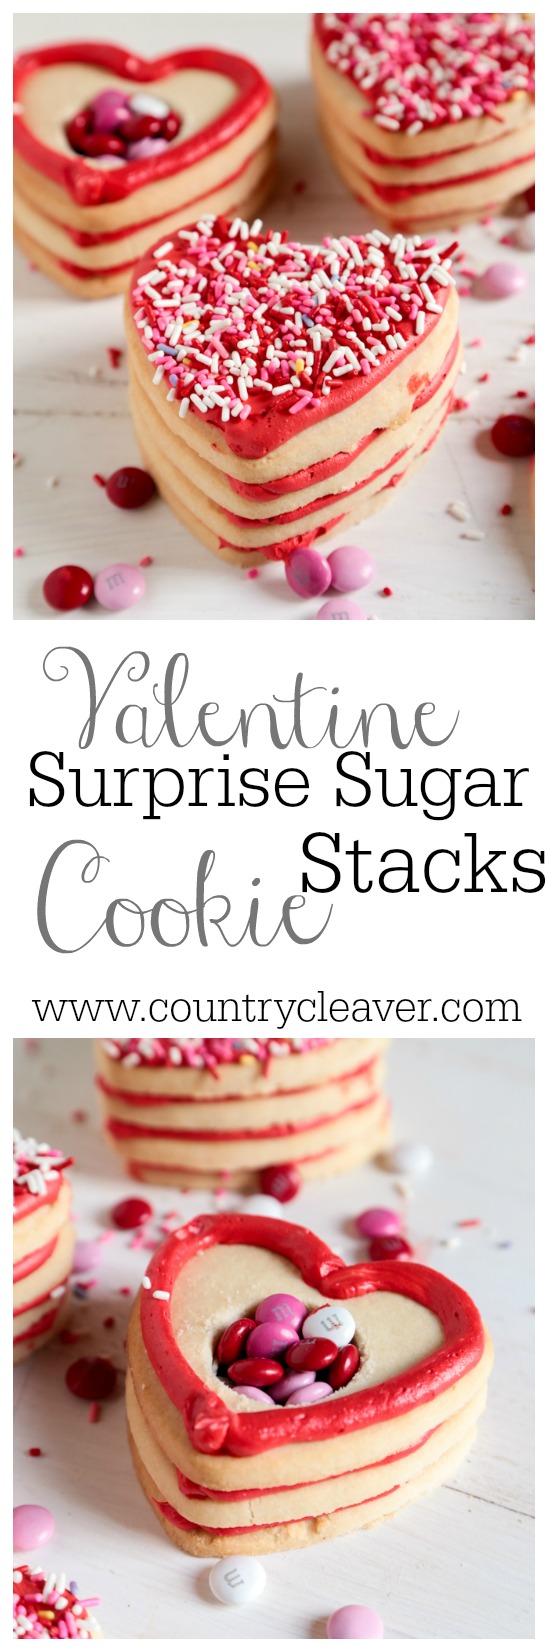 Valentine Surprise Sugar  Cookie Stacks - Your Valentine will be so surprised by what's inside! - www.countrycleaver.com